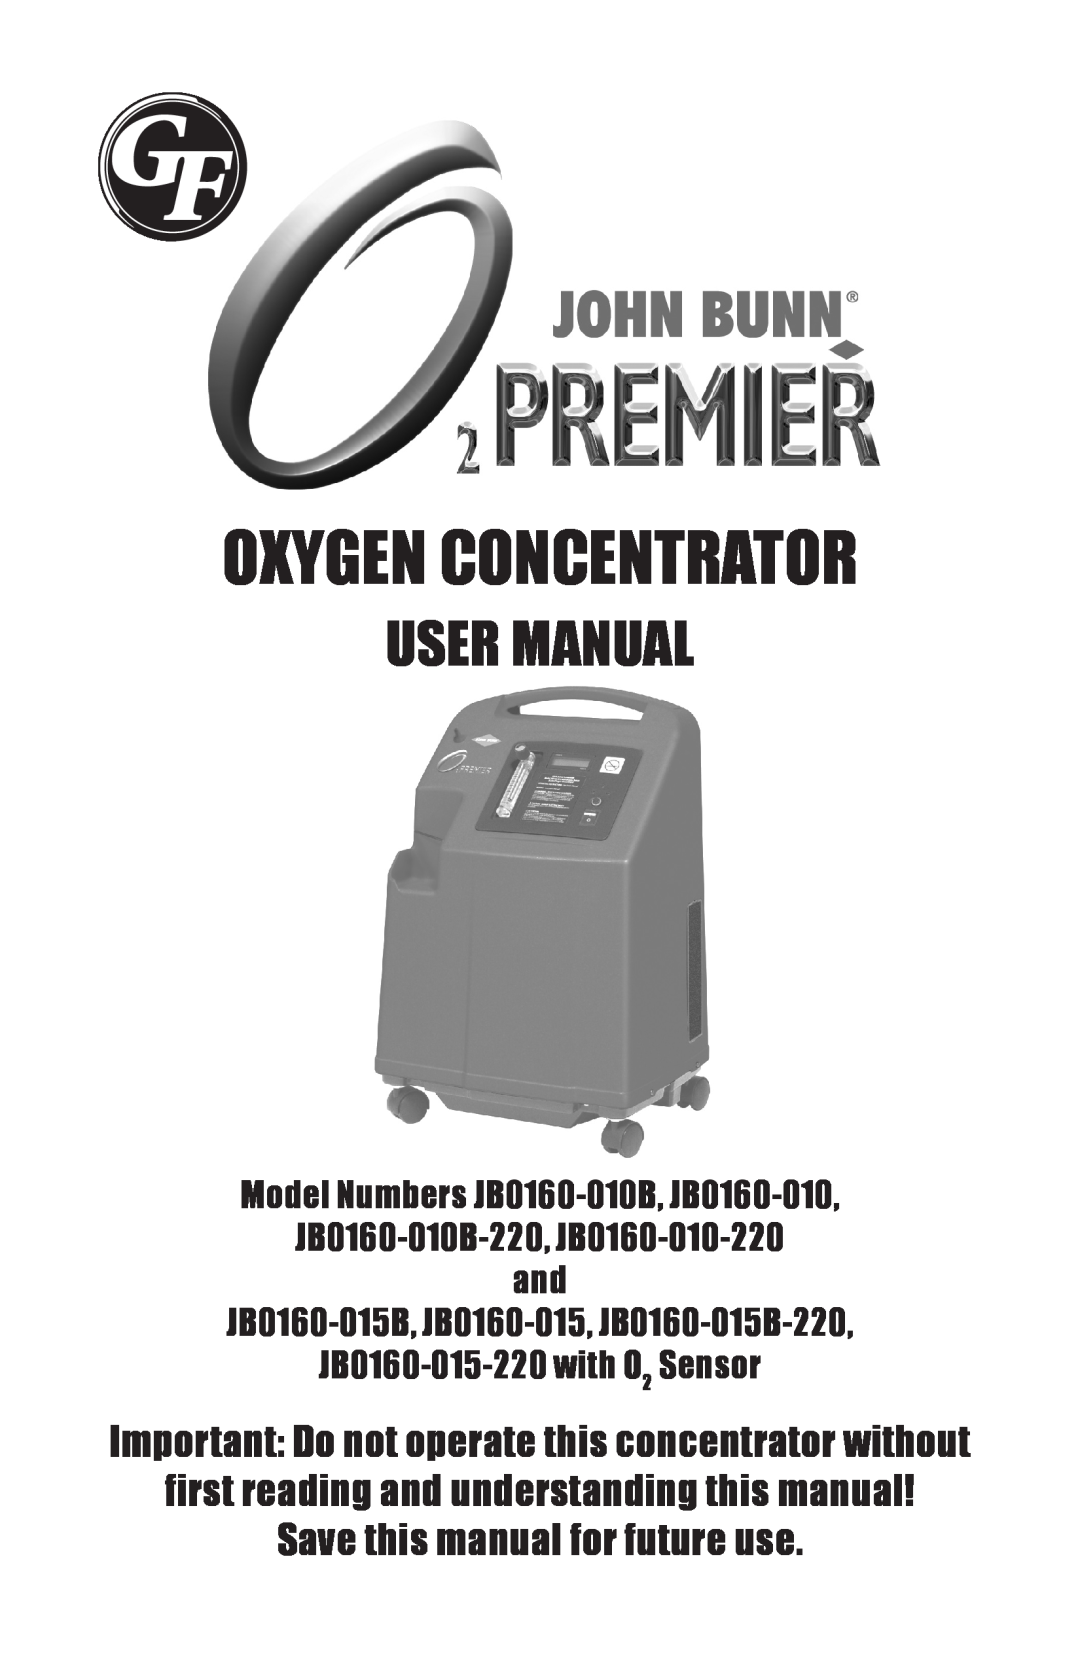 Graham Field JB0160-015 user manual Oxygen Concentrator, User Manual, Important Do not operate this concentrator without 